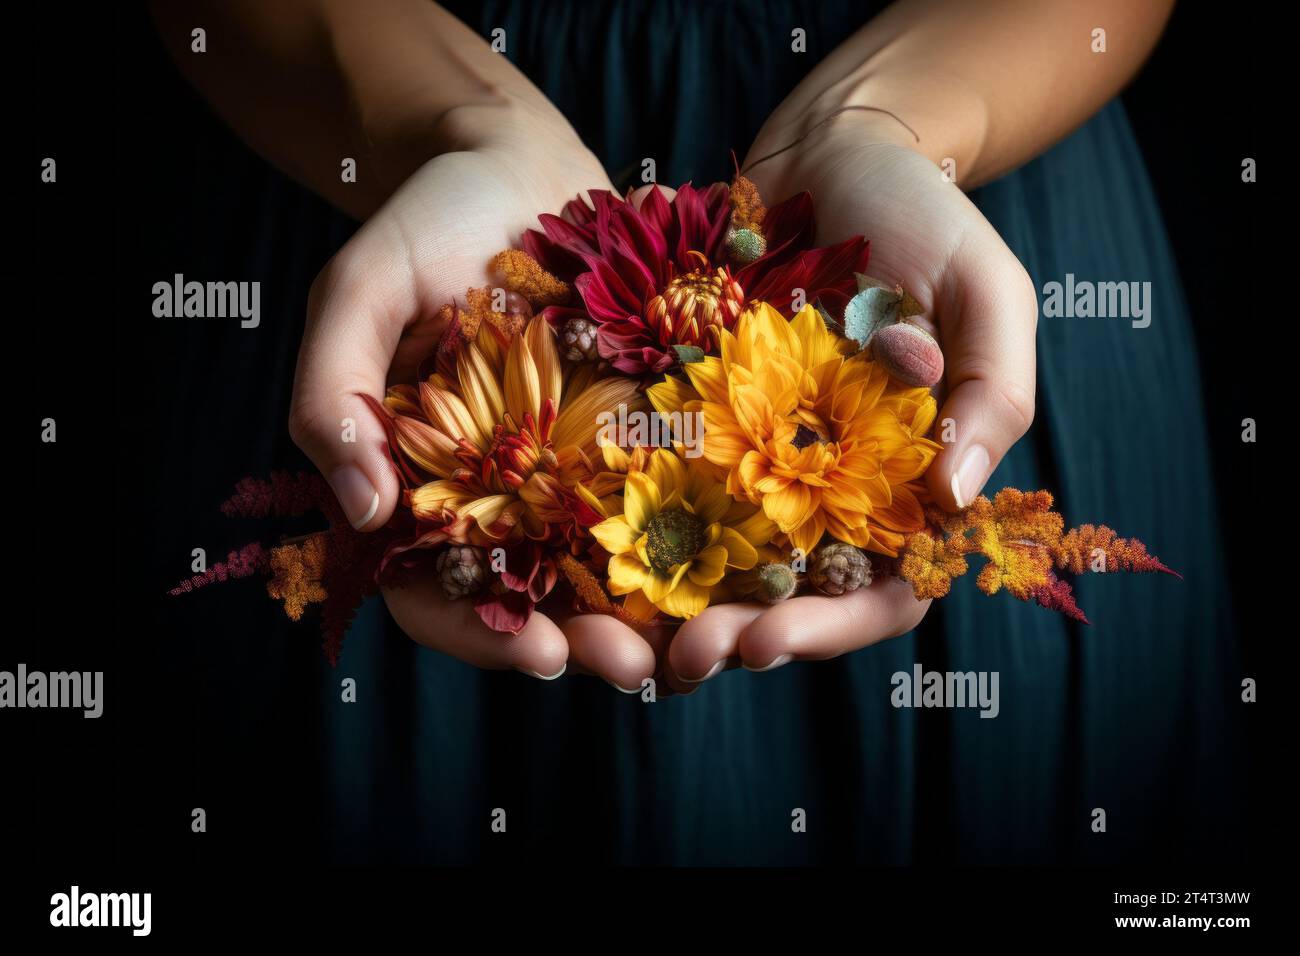 Hands holding a handful of flowers in orange and reddish tones with a dark background of a bluish woman's dress as a token of gratitude Stock Photo